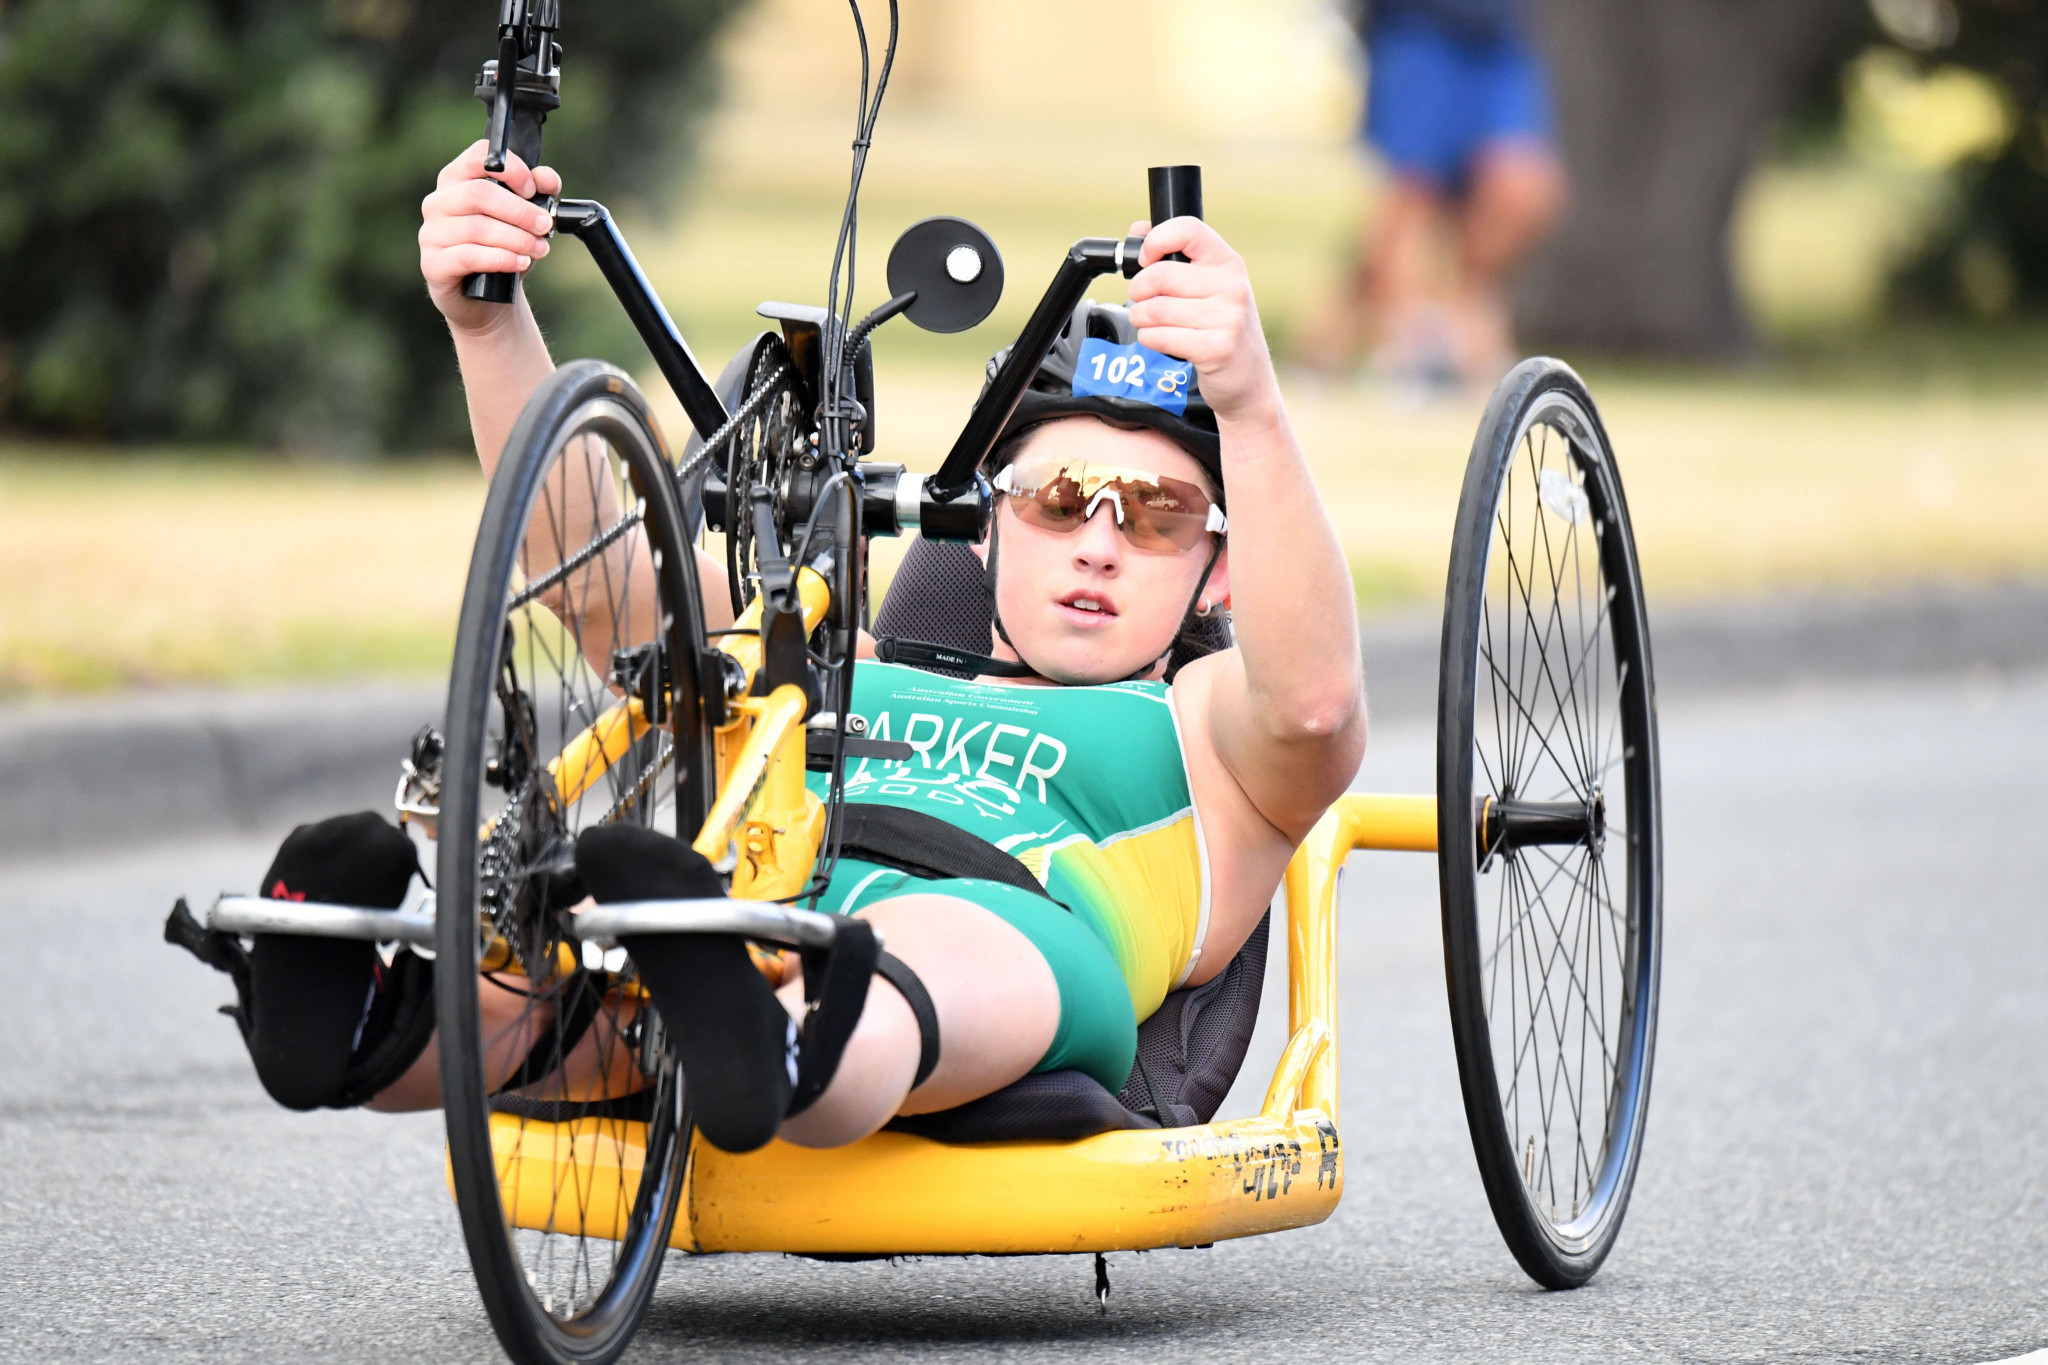 Parker makes sensational Para-triathlon switch just months after life-changing accident